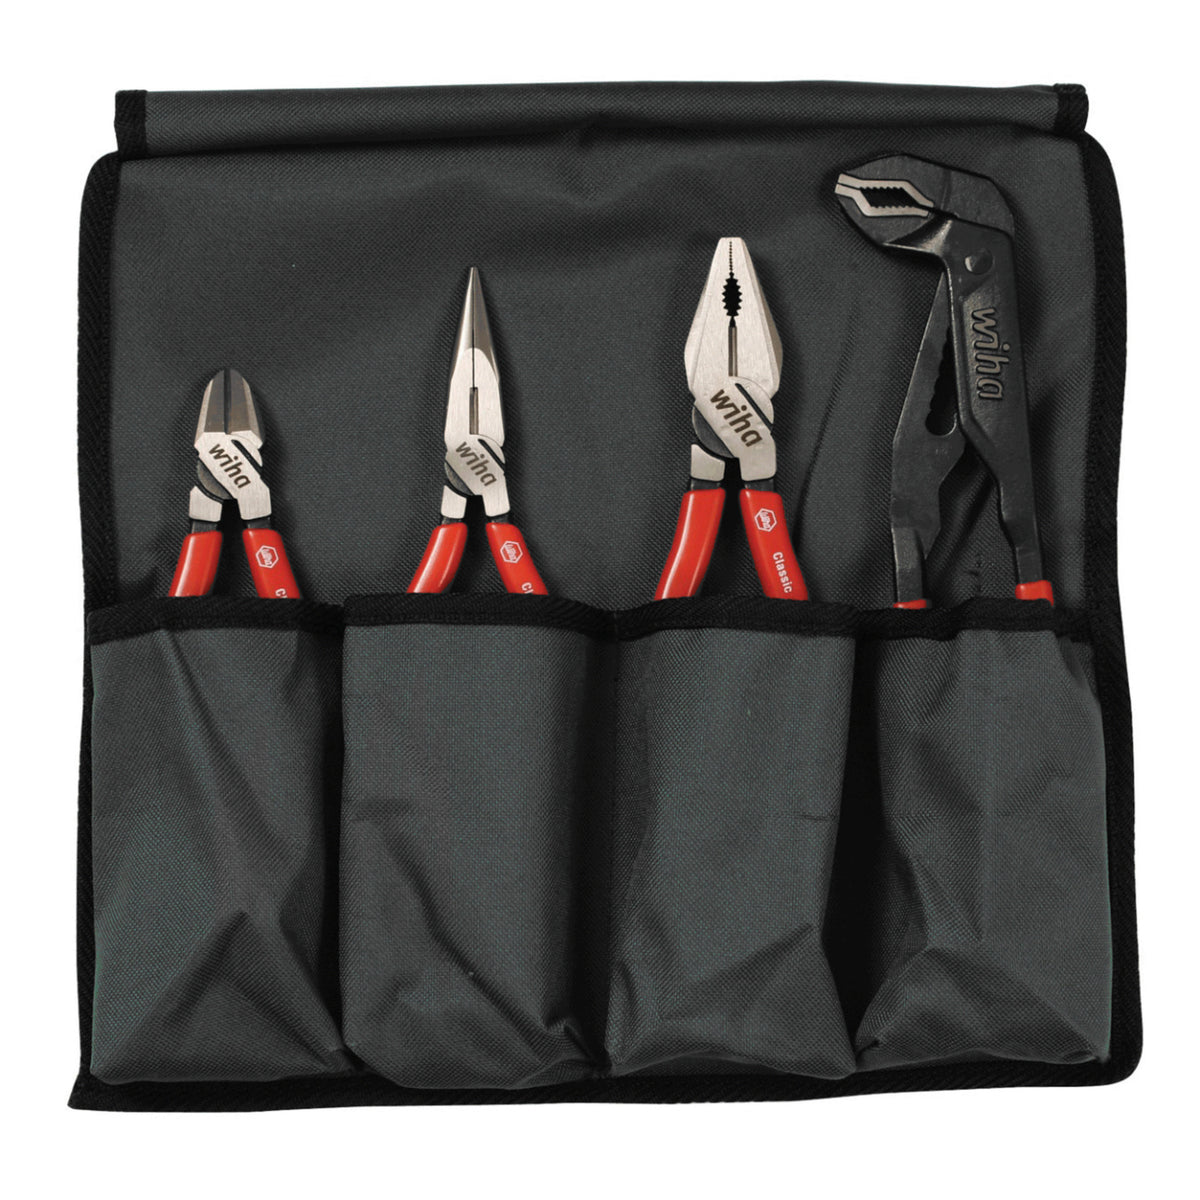 Wiha 32601 4 Piece Classic Grip Pliers and Cutters Set with Canvas Pouch